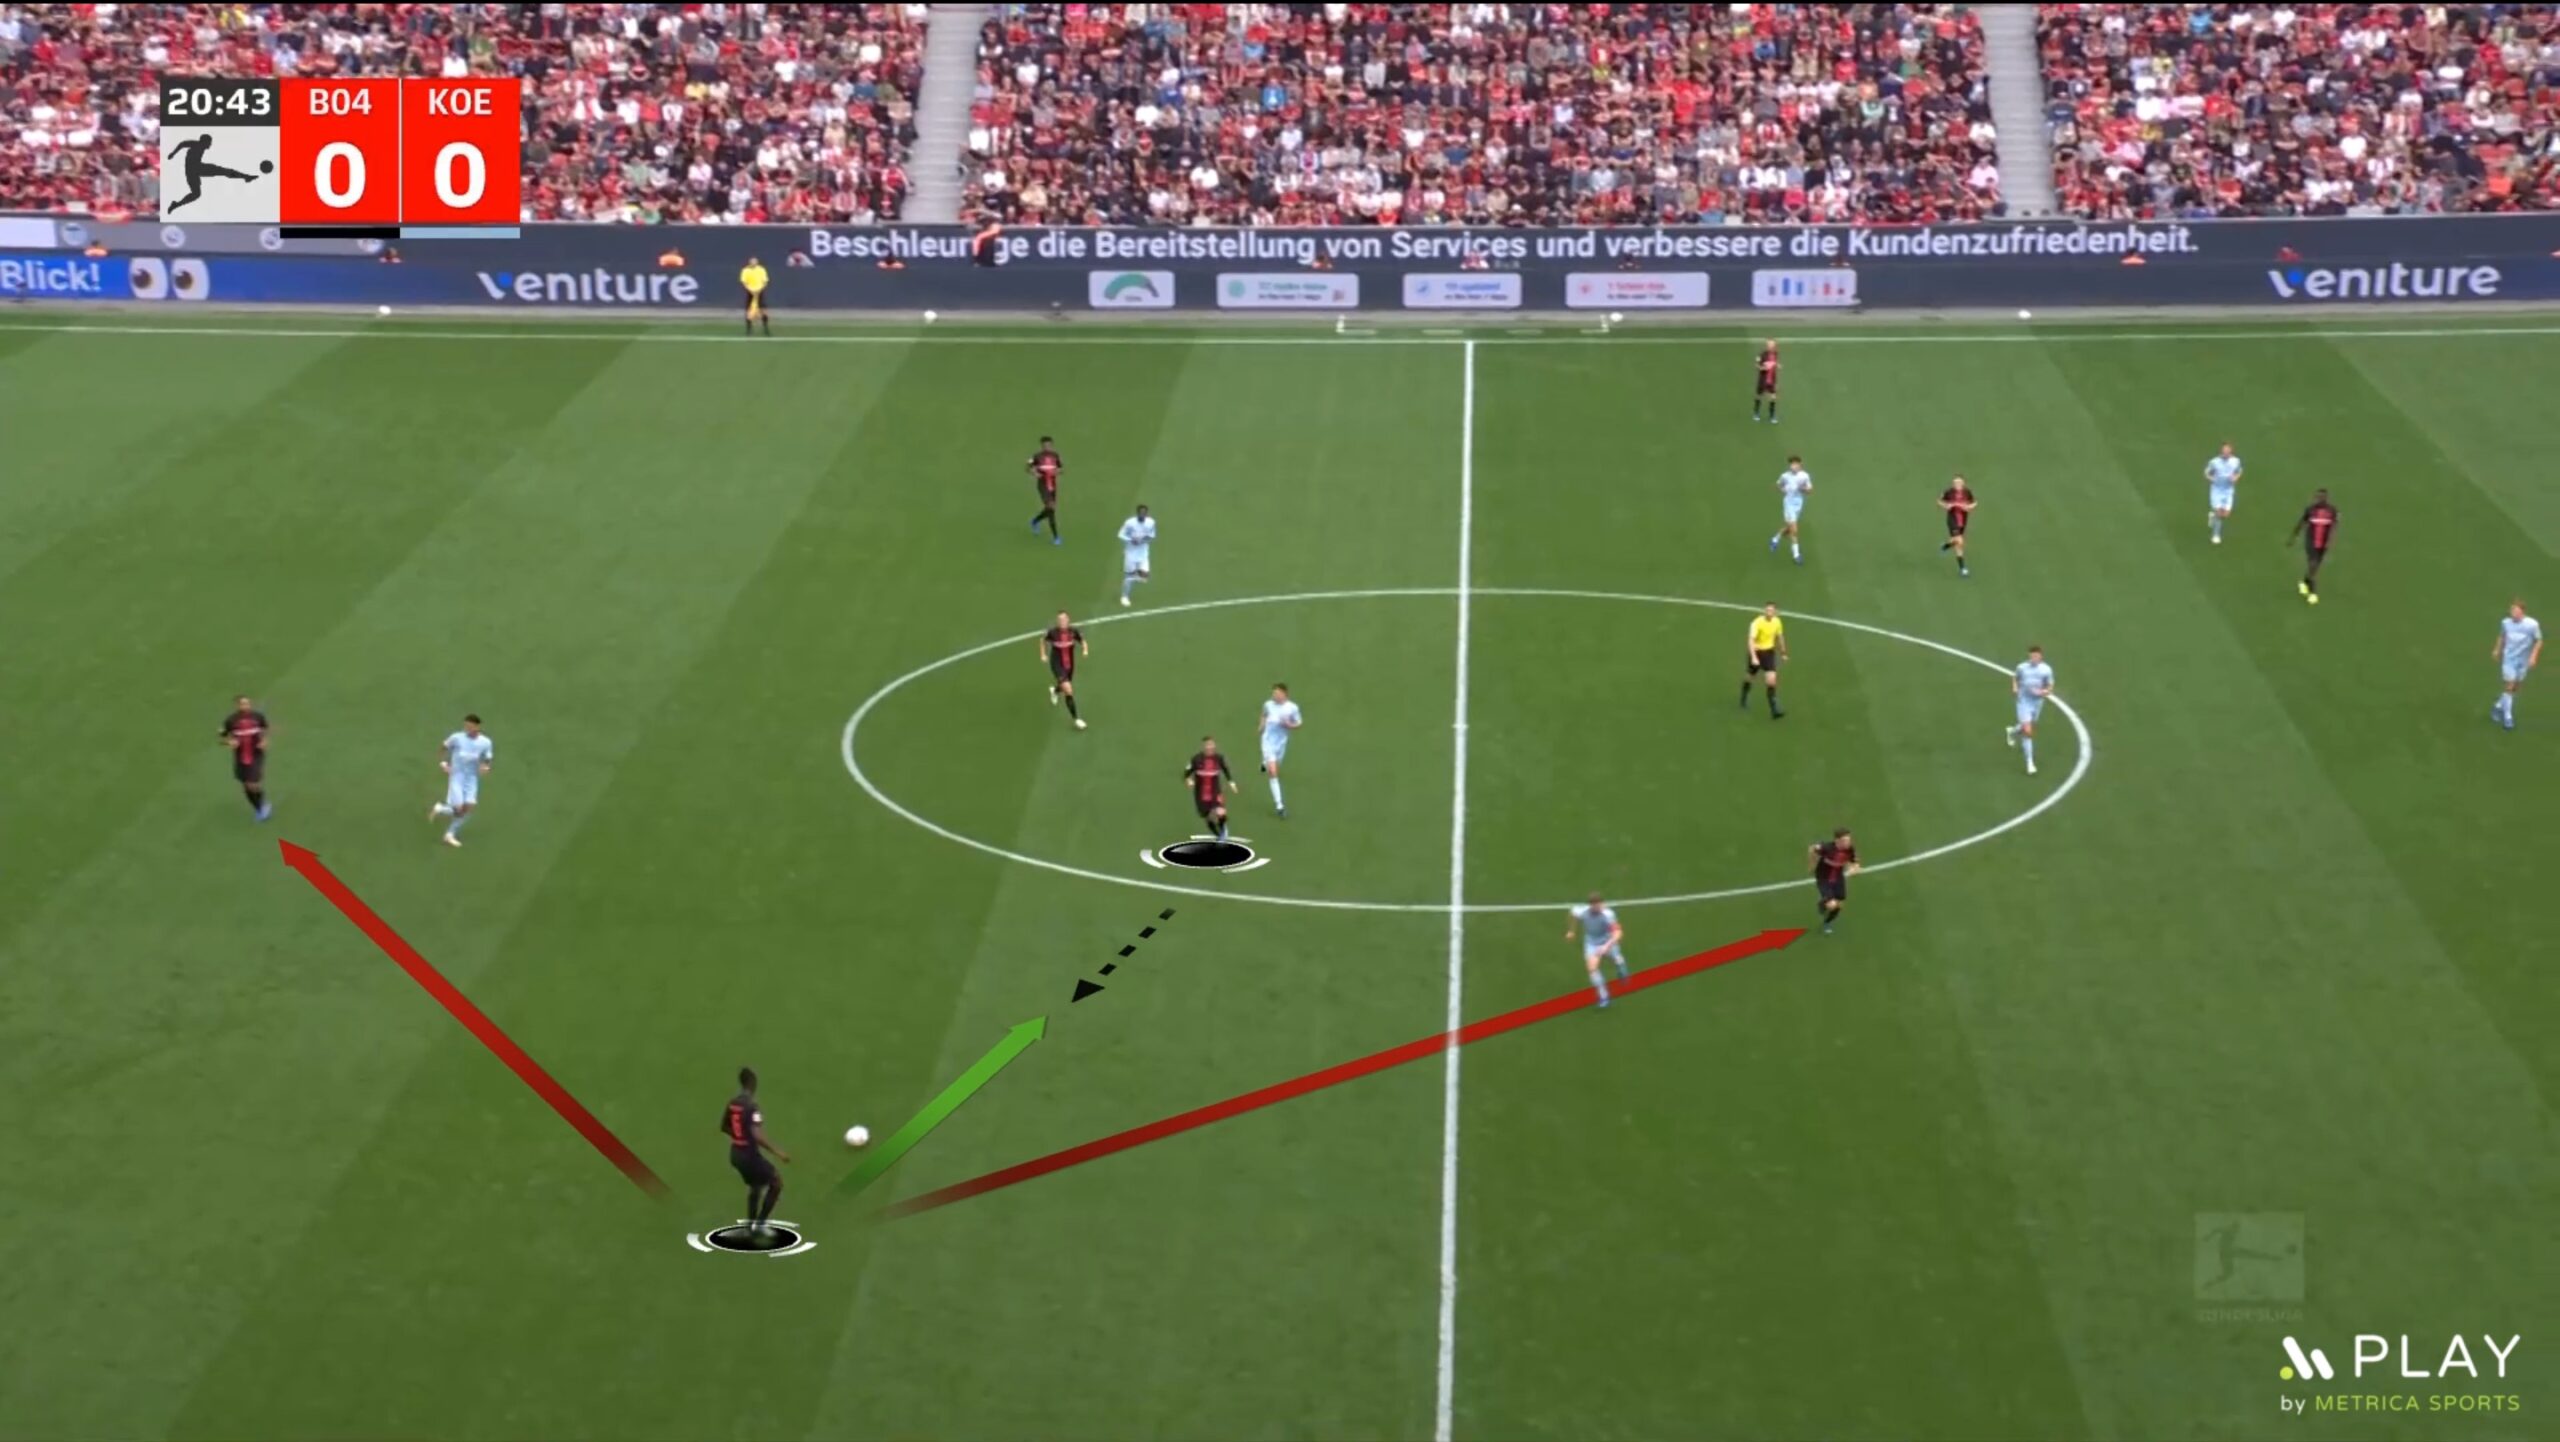 Key Concepts for Good Ball Circulation. Emergency Support. Palacios (Bayer Leverkusen, Midfielder) understands that his teammate is being pressed and has no clear passing options, so he goes fast to provide an emergency support and help the play progress.